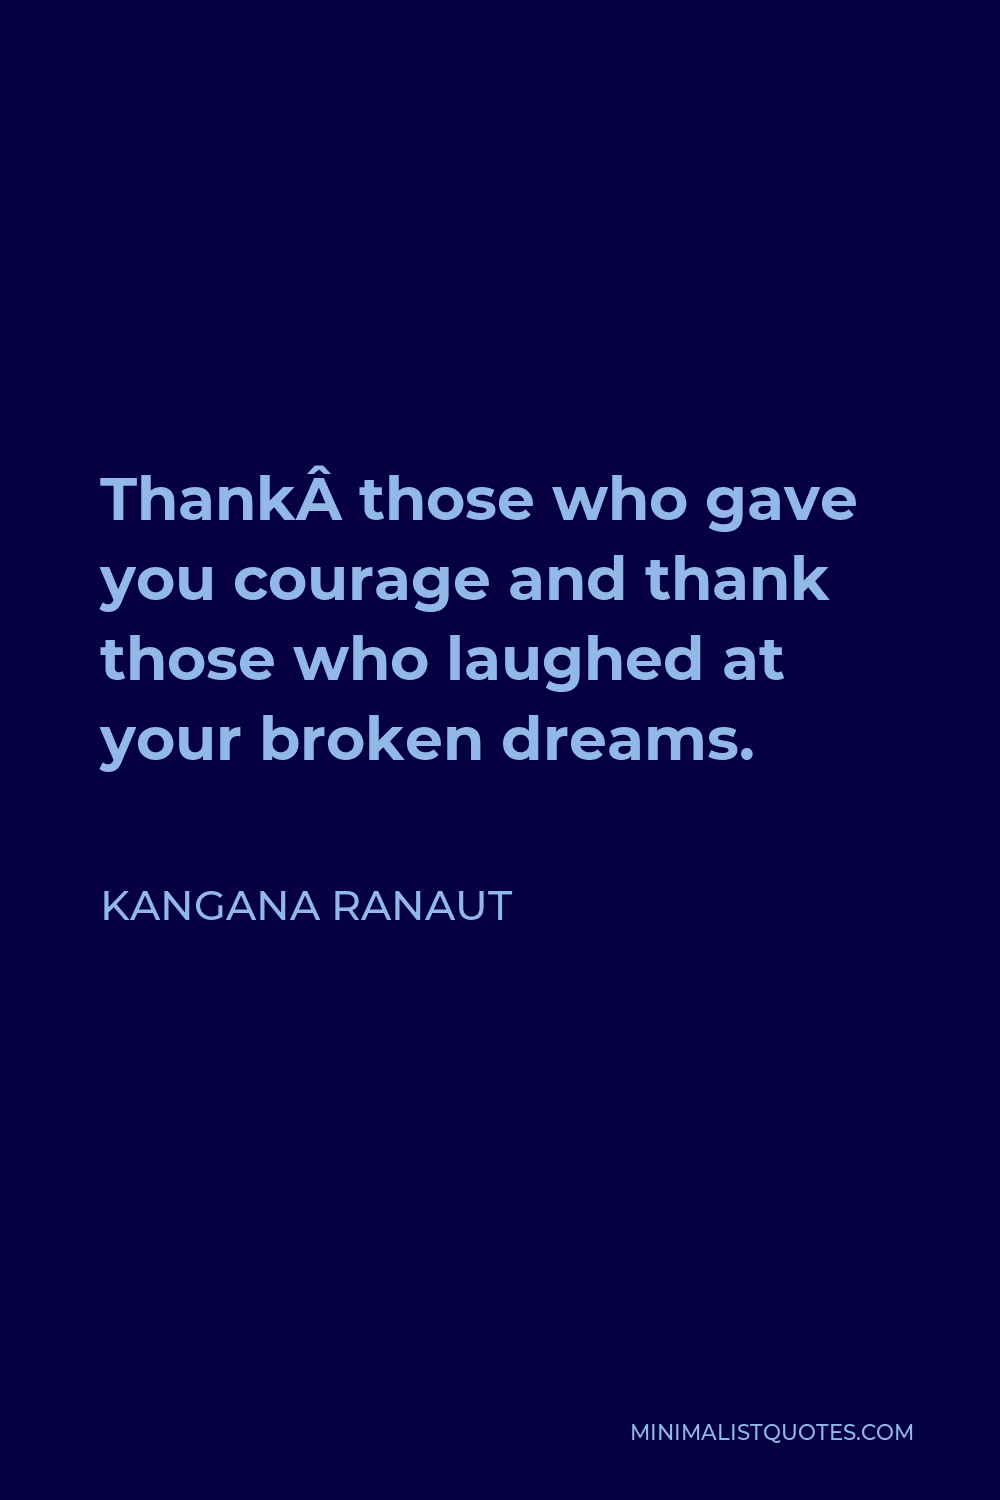 Kangana Ranaut Quote - Thank those who gave you courage and thank those who laughed at your broken dreams.